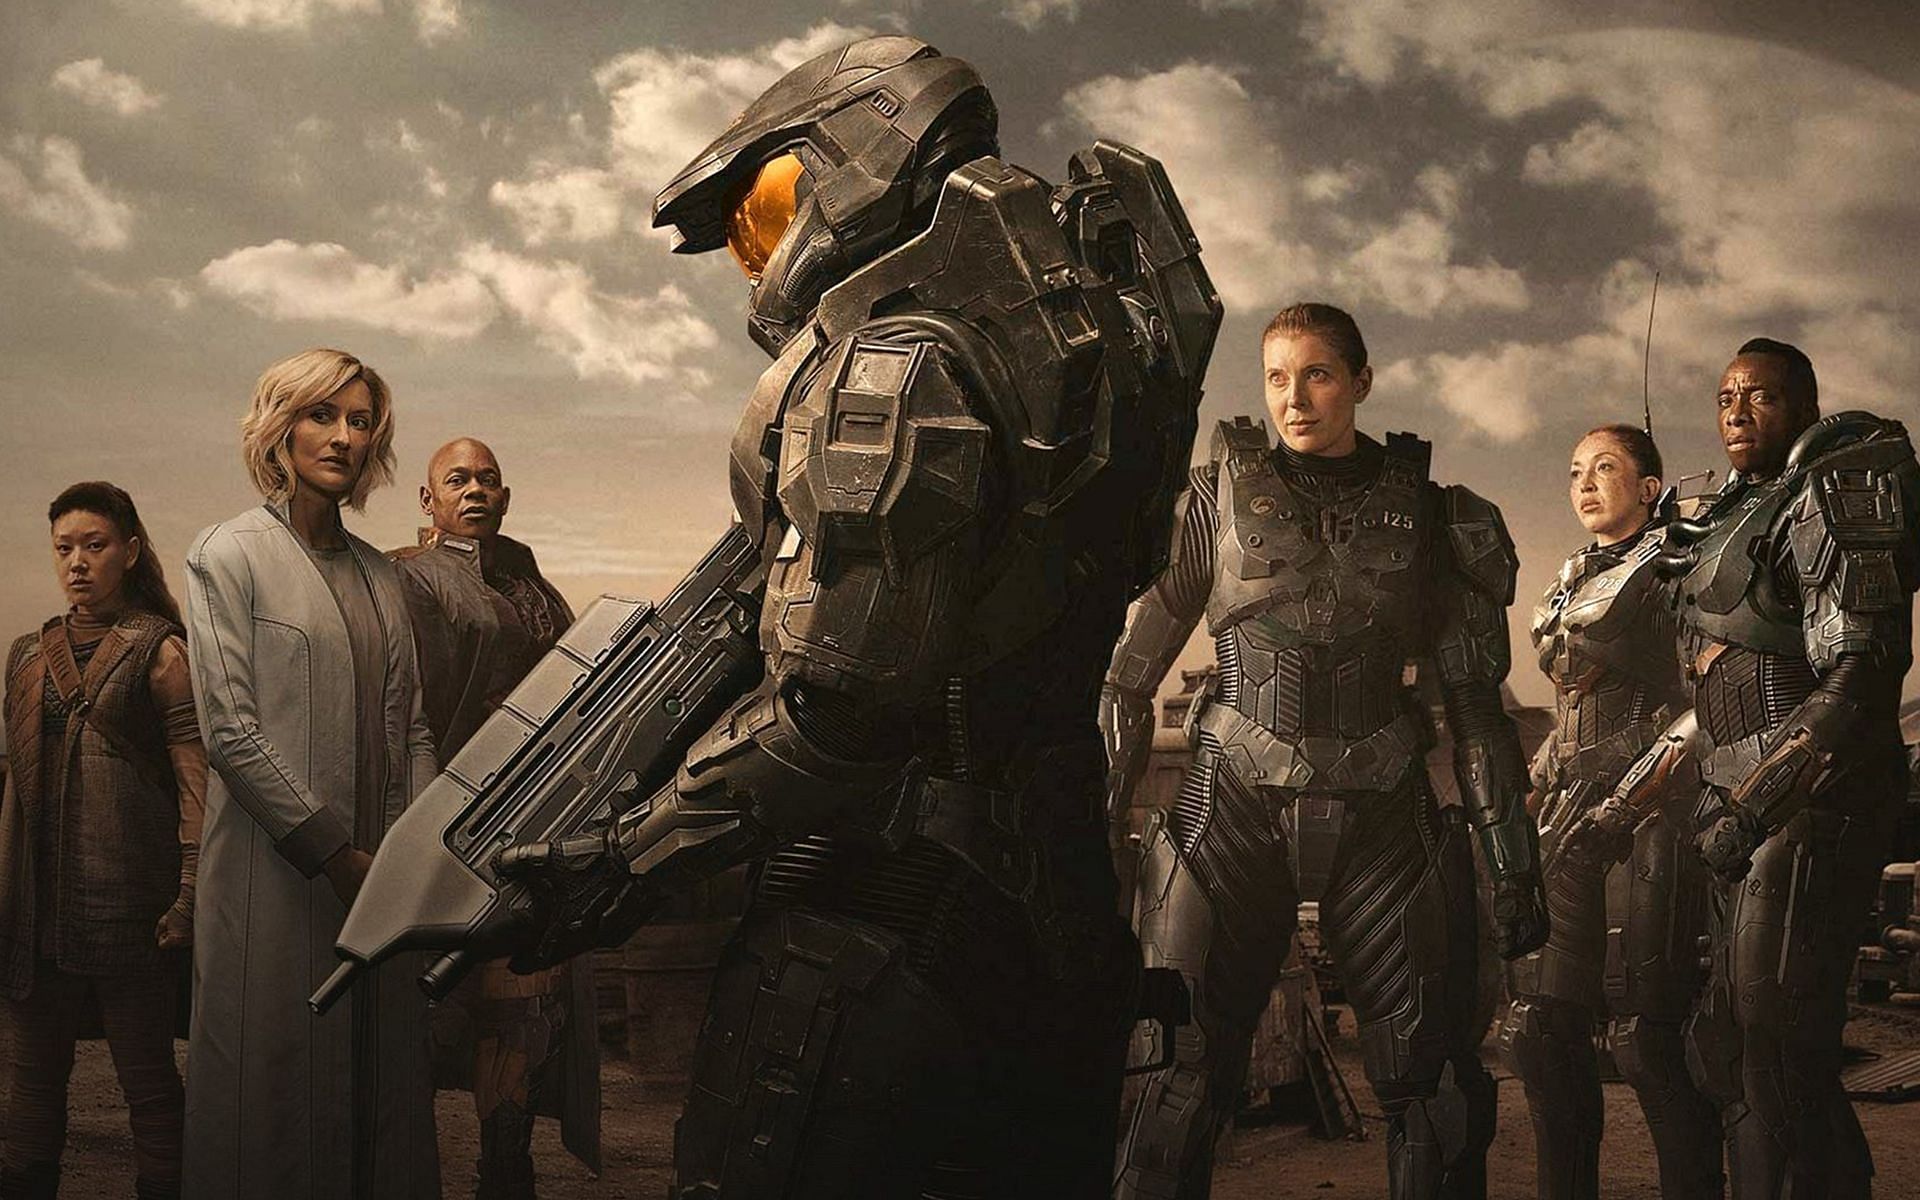 Halo Episode 5 of Halo will be released Thursday, April 21, 2022, at 12.00 am PST/03.00 am EST on Paramount+. (Image via IMDb)